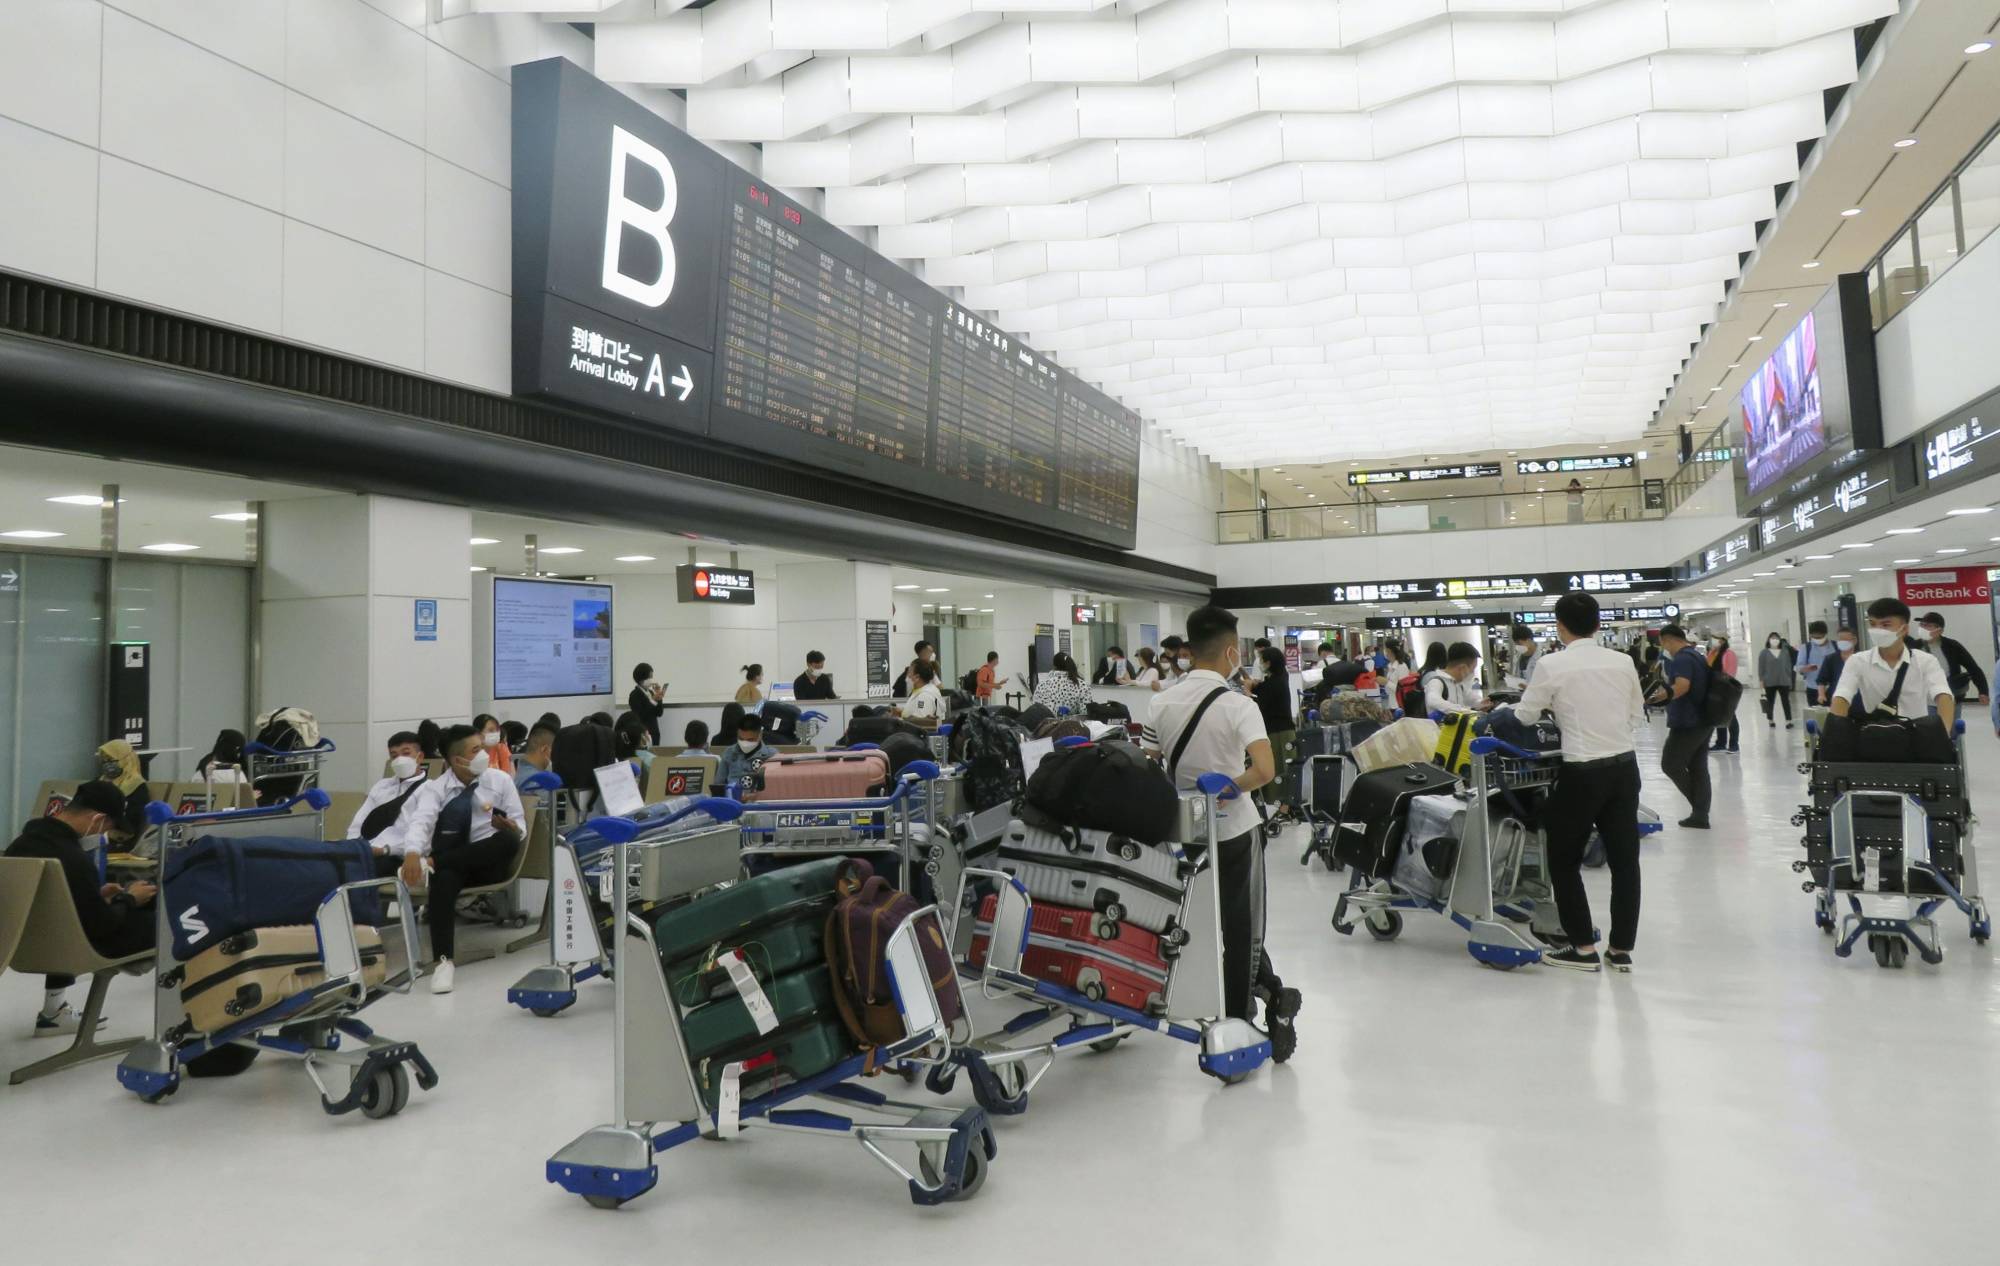 The arrival lobby at Narita Airport on Wednesday | KYODO